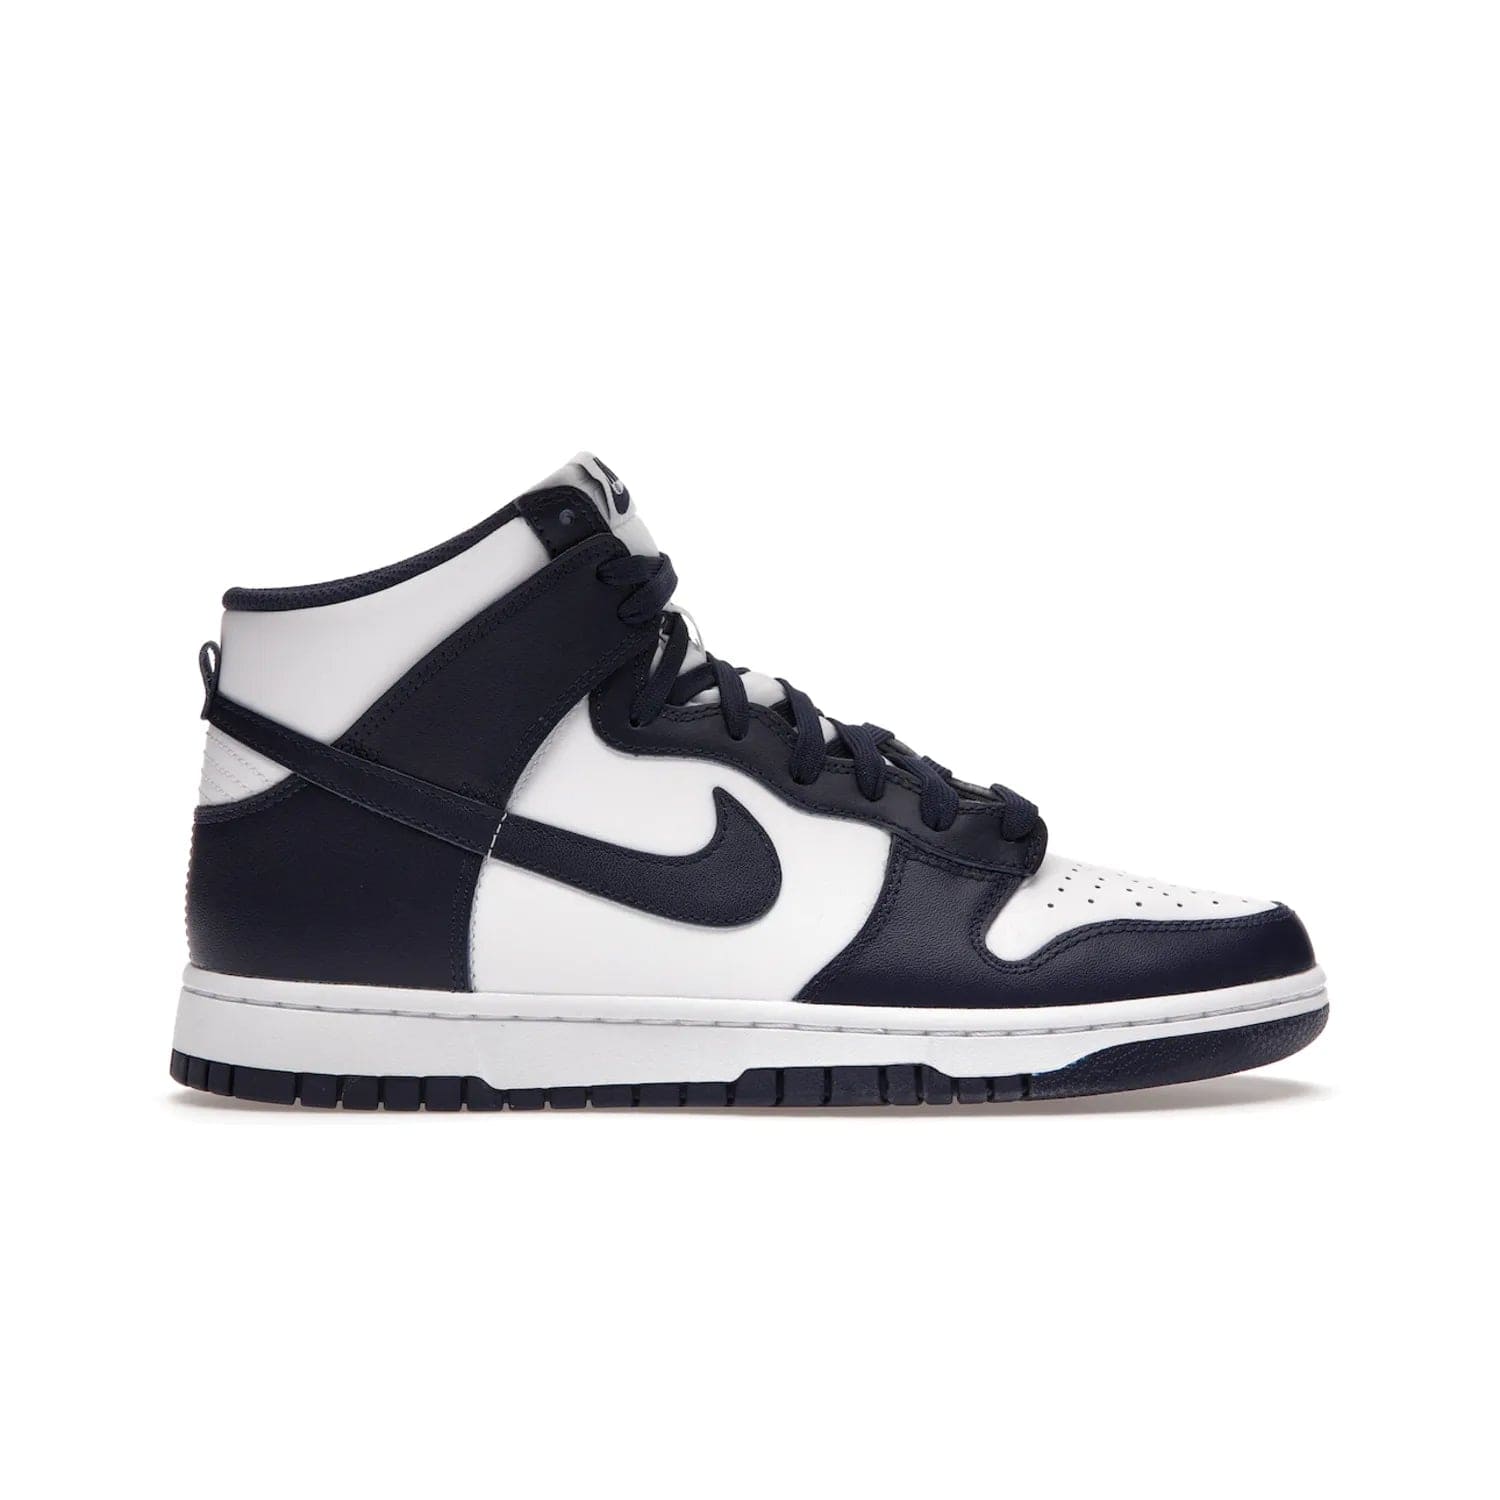 Nike Dunk High Championship Navy - Image 1 - Only at www.BallersClubKickz.com - Classic athletic style meets striking color-blocking on the Nike Dunk High Championship Navy. A white leather upper with Championship Navy overlays creates a retro look with a woven tongue label and sole. Unleash your inner champion with the Nike Dunk High Championship Navy.